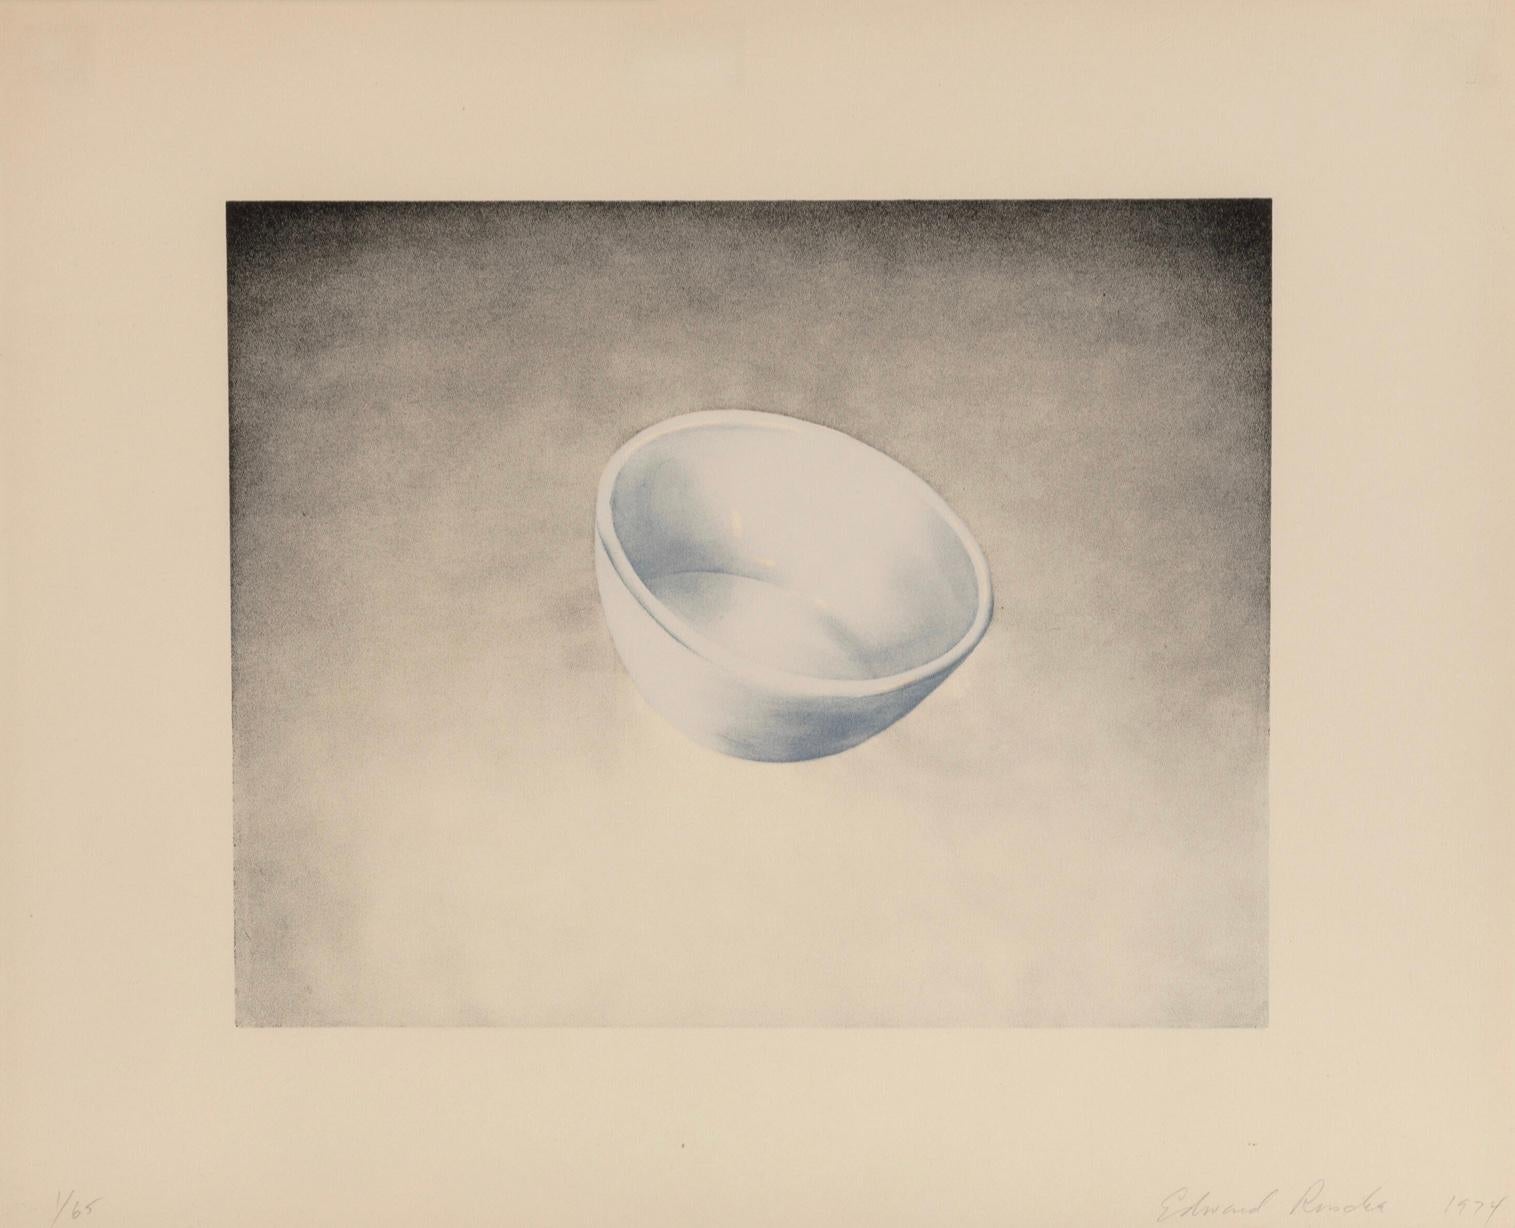 ED RUSCHA (1937-Present)

Ed Ruscha's print 'Bowl', from Domestic Tranquility, is a lithograph printed in colours, 1974, on Arches Cover paper. It is signed, dated and numbered 1/65 (there were also 24 artist's proofs) in pencil, Co-published by